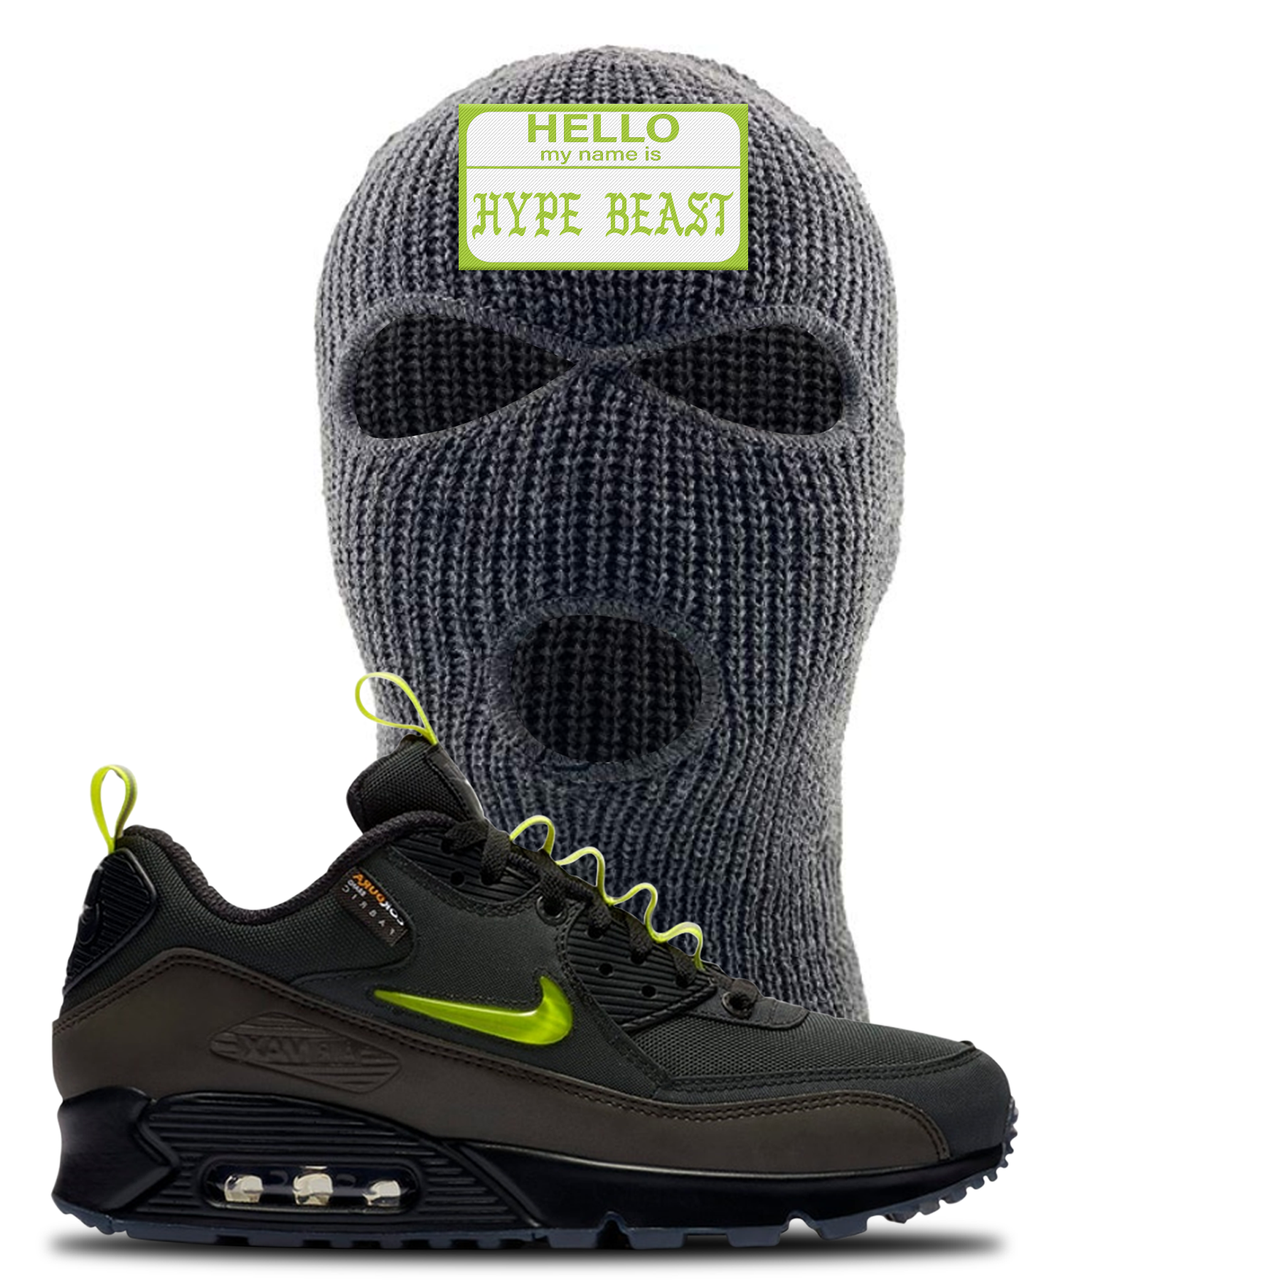 The Basement X Air Max 90 Manchester Hello My Name is Hype Beast Dark Gray Sneaker Hook Up Ski Mask